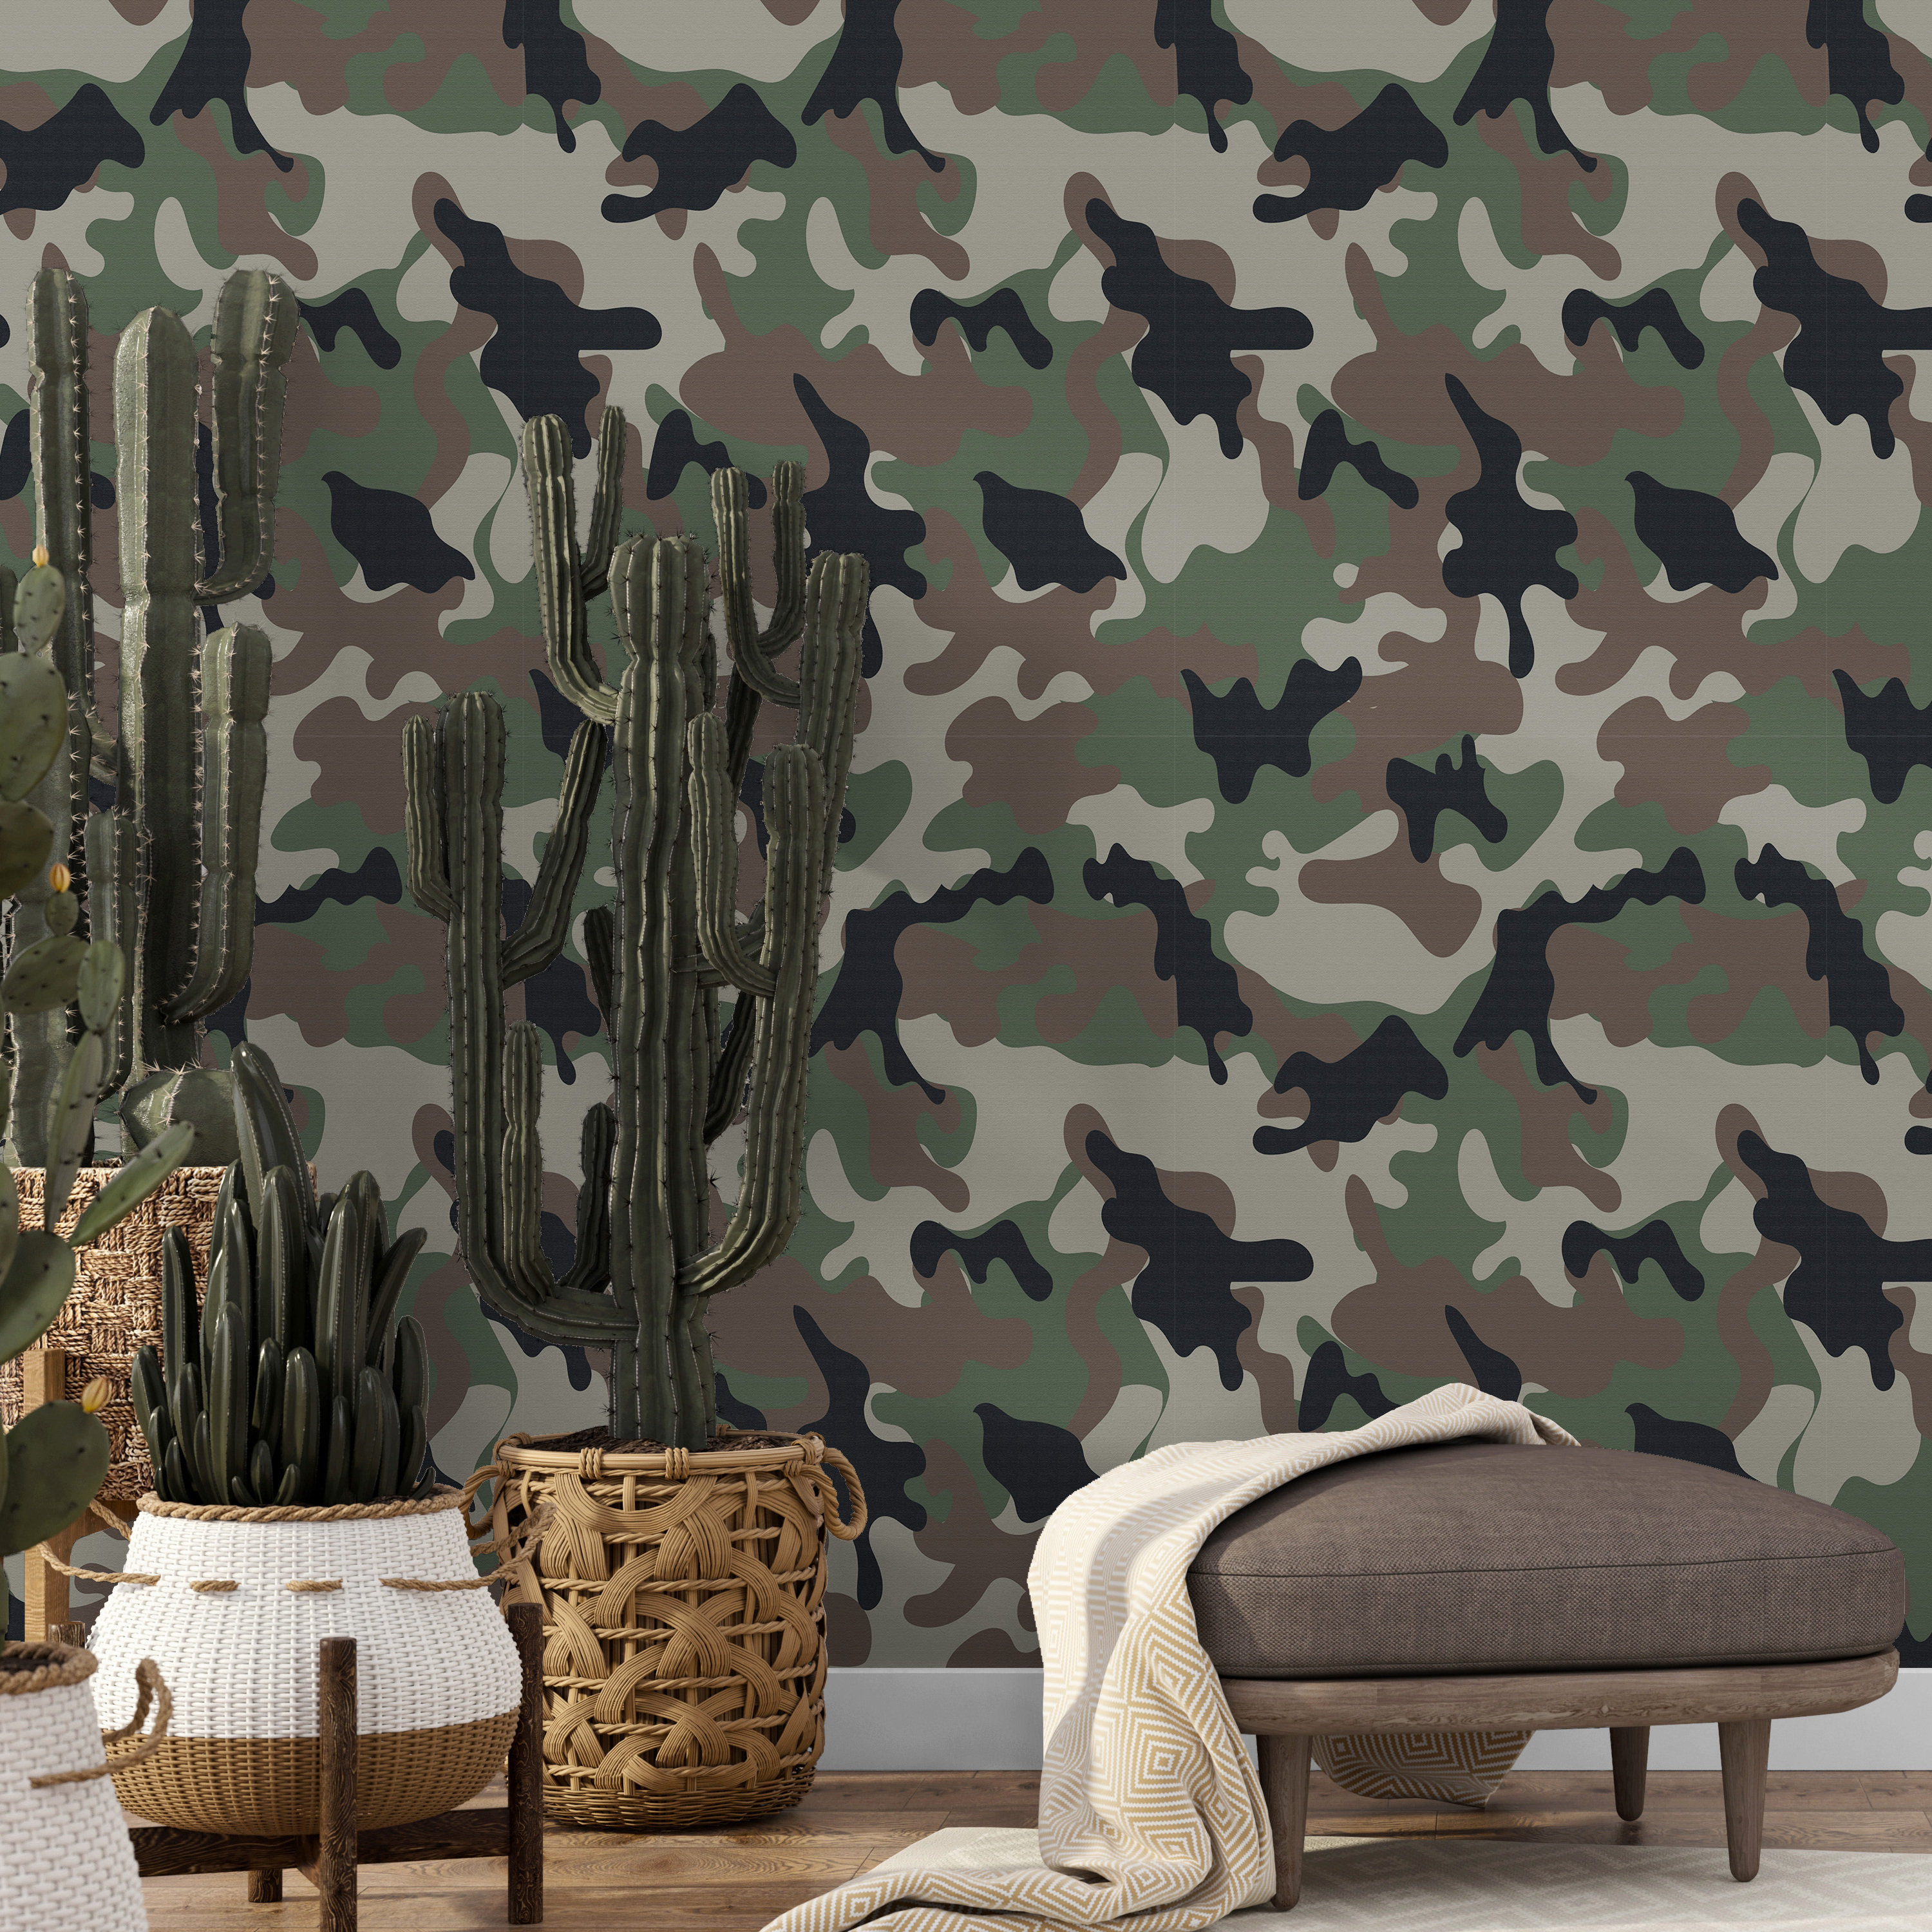 Military camouflage wall mural abstract army green camo wallpaper for